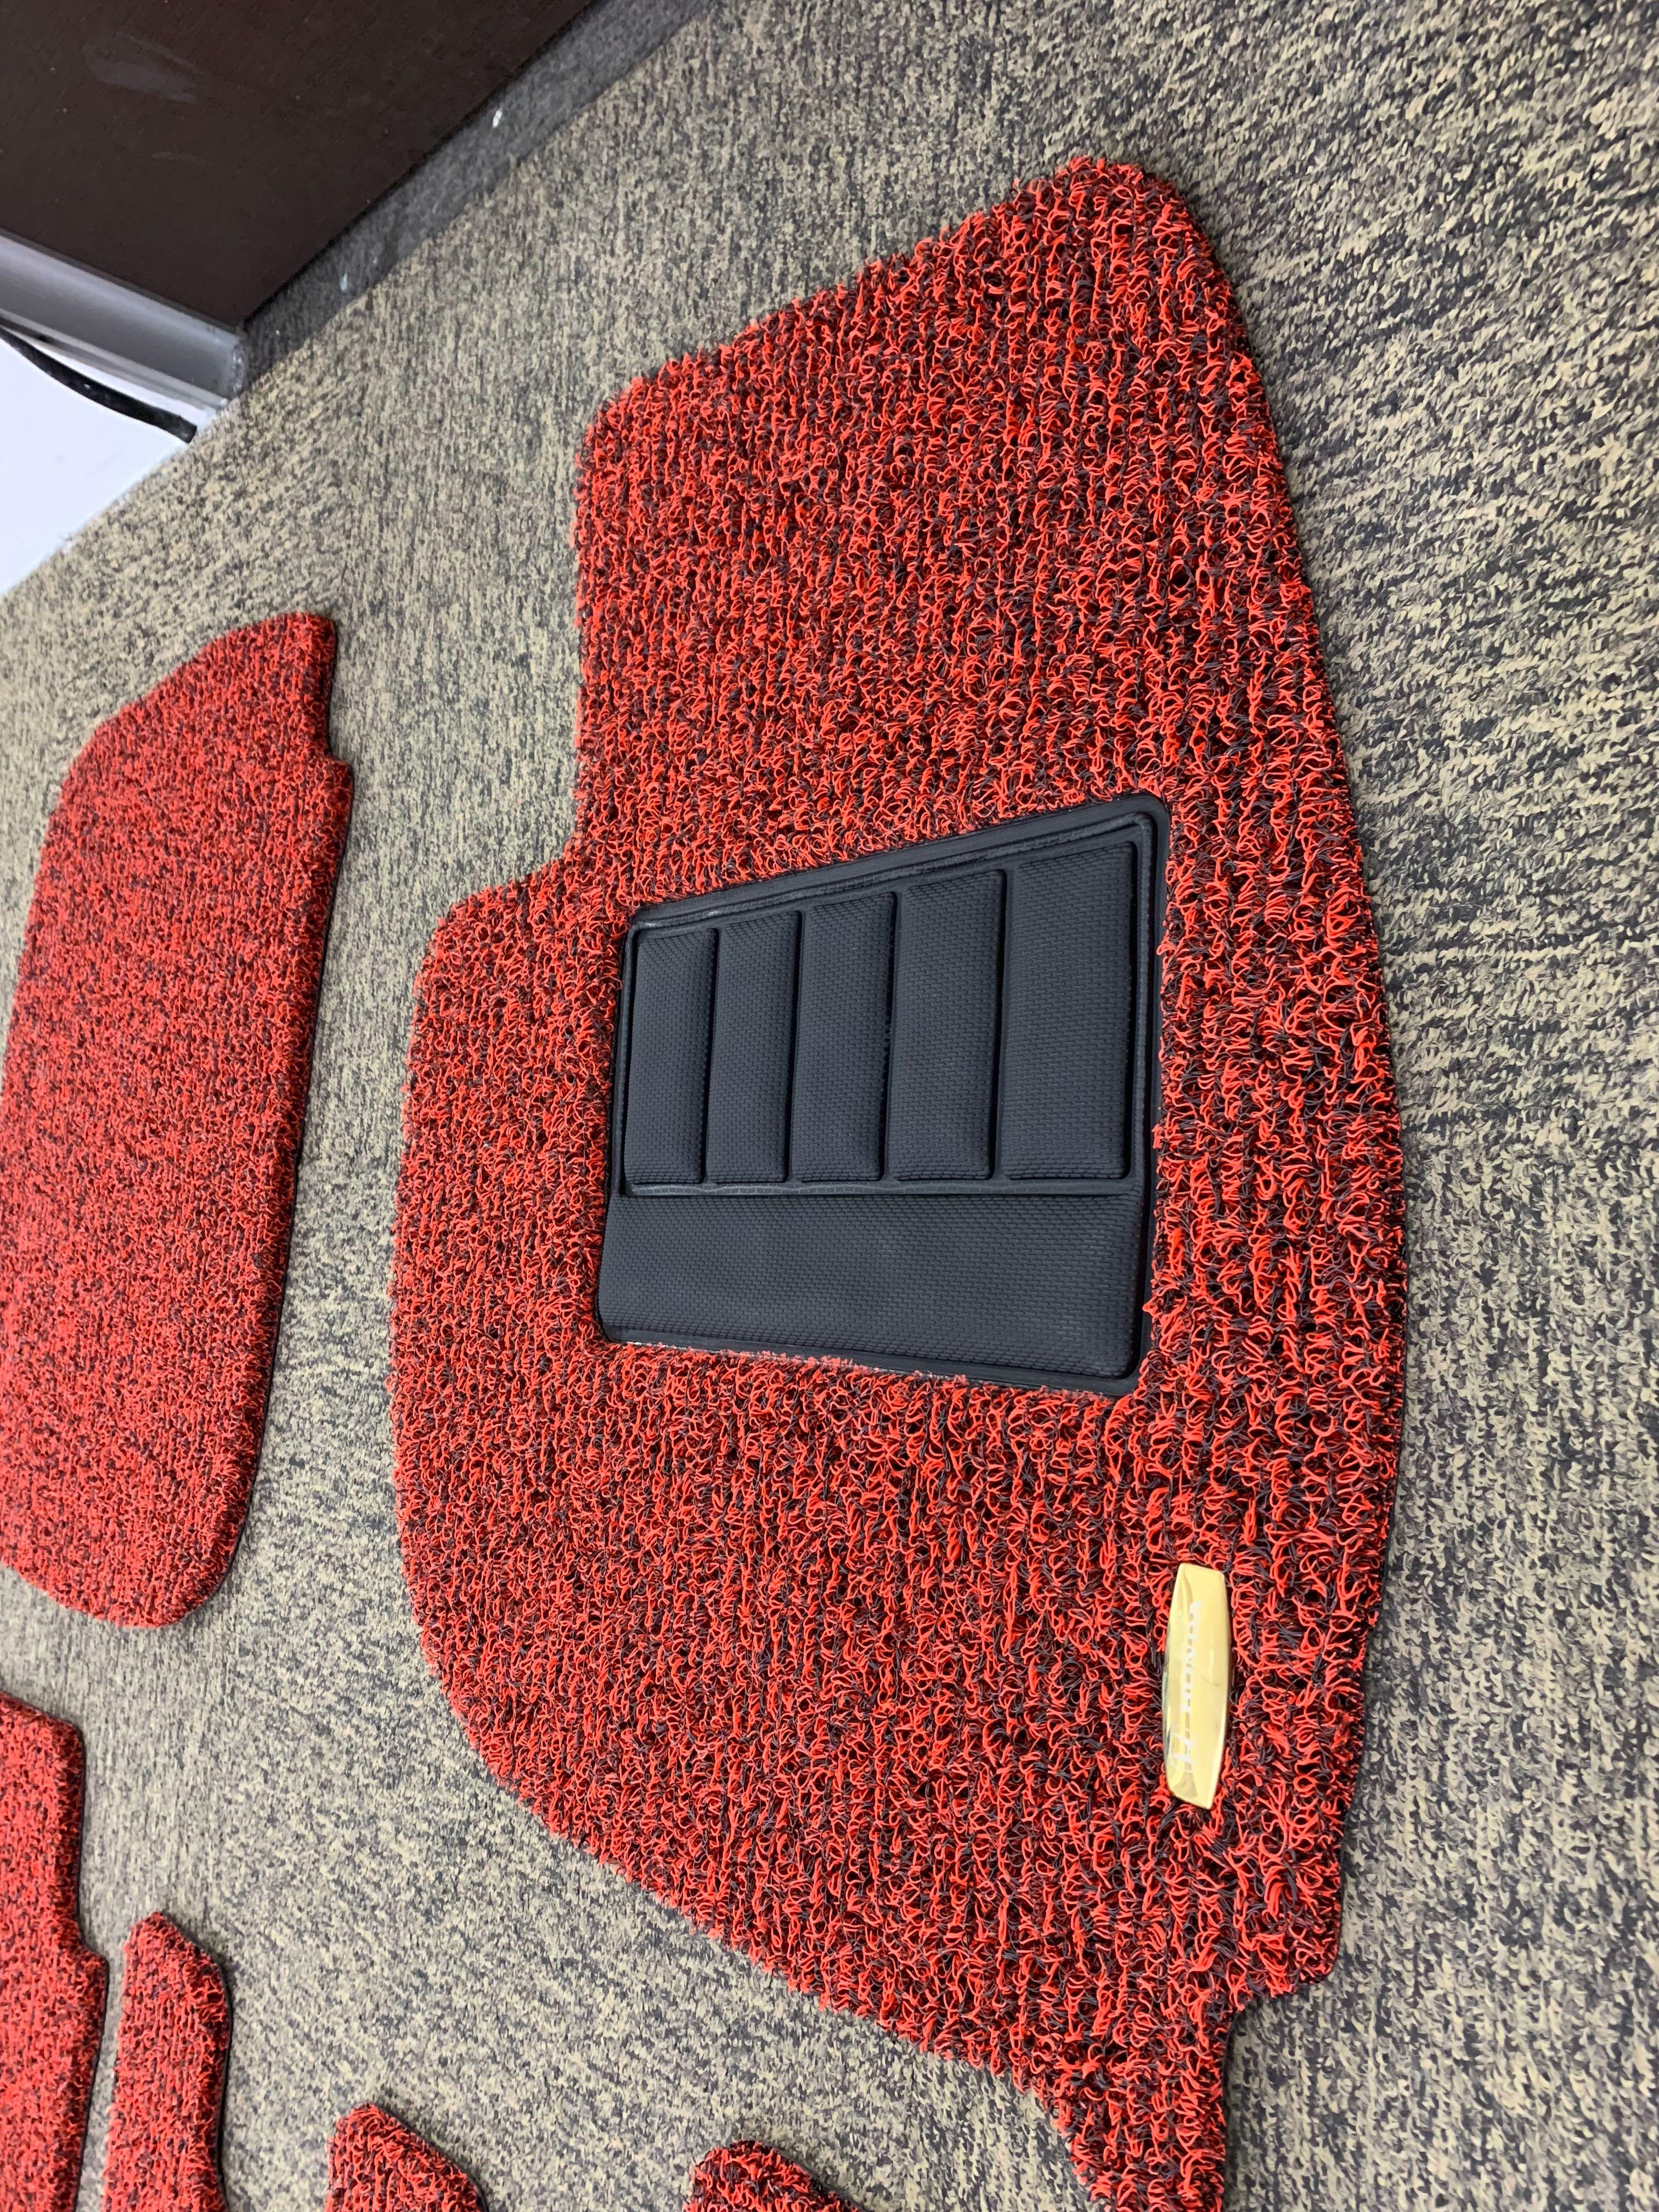 2019 Honda Vezel Customized Fitted Car Floor Mat Black Red Two